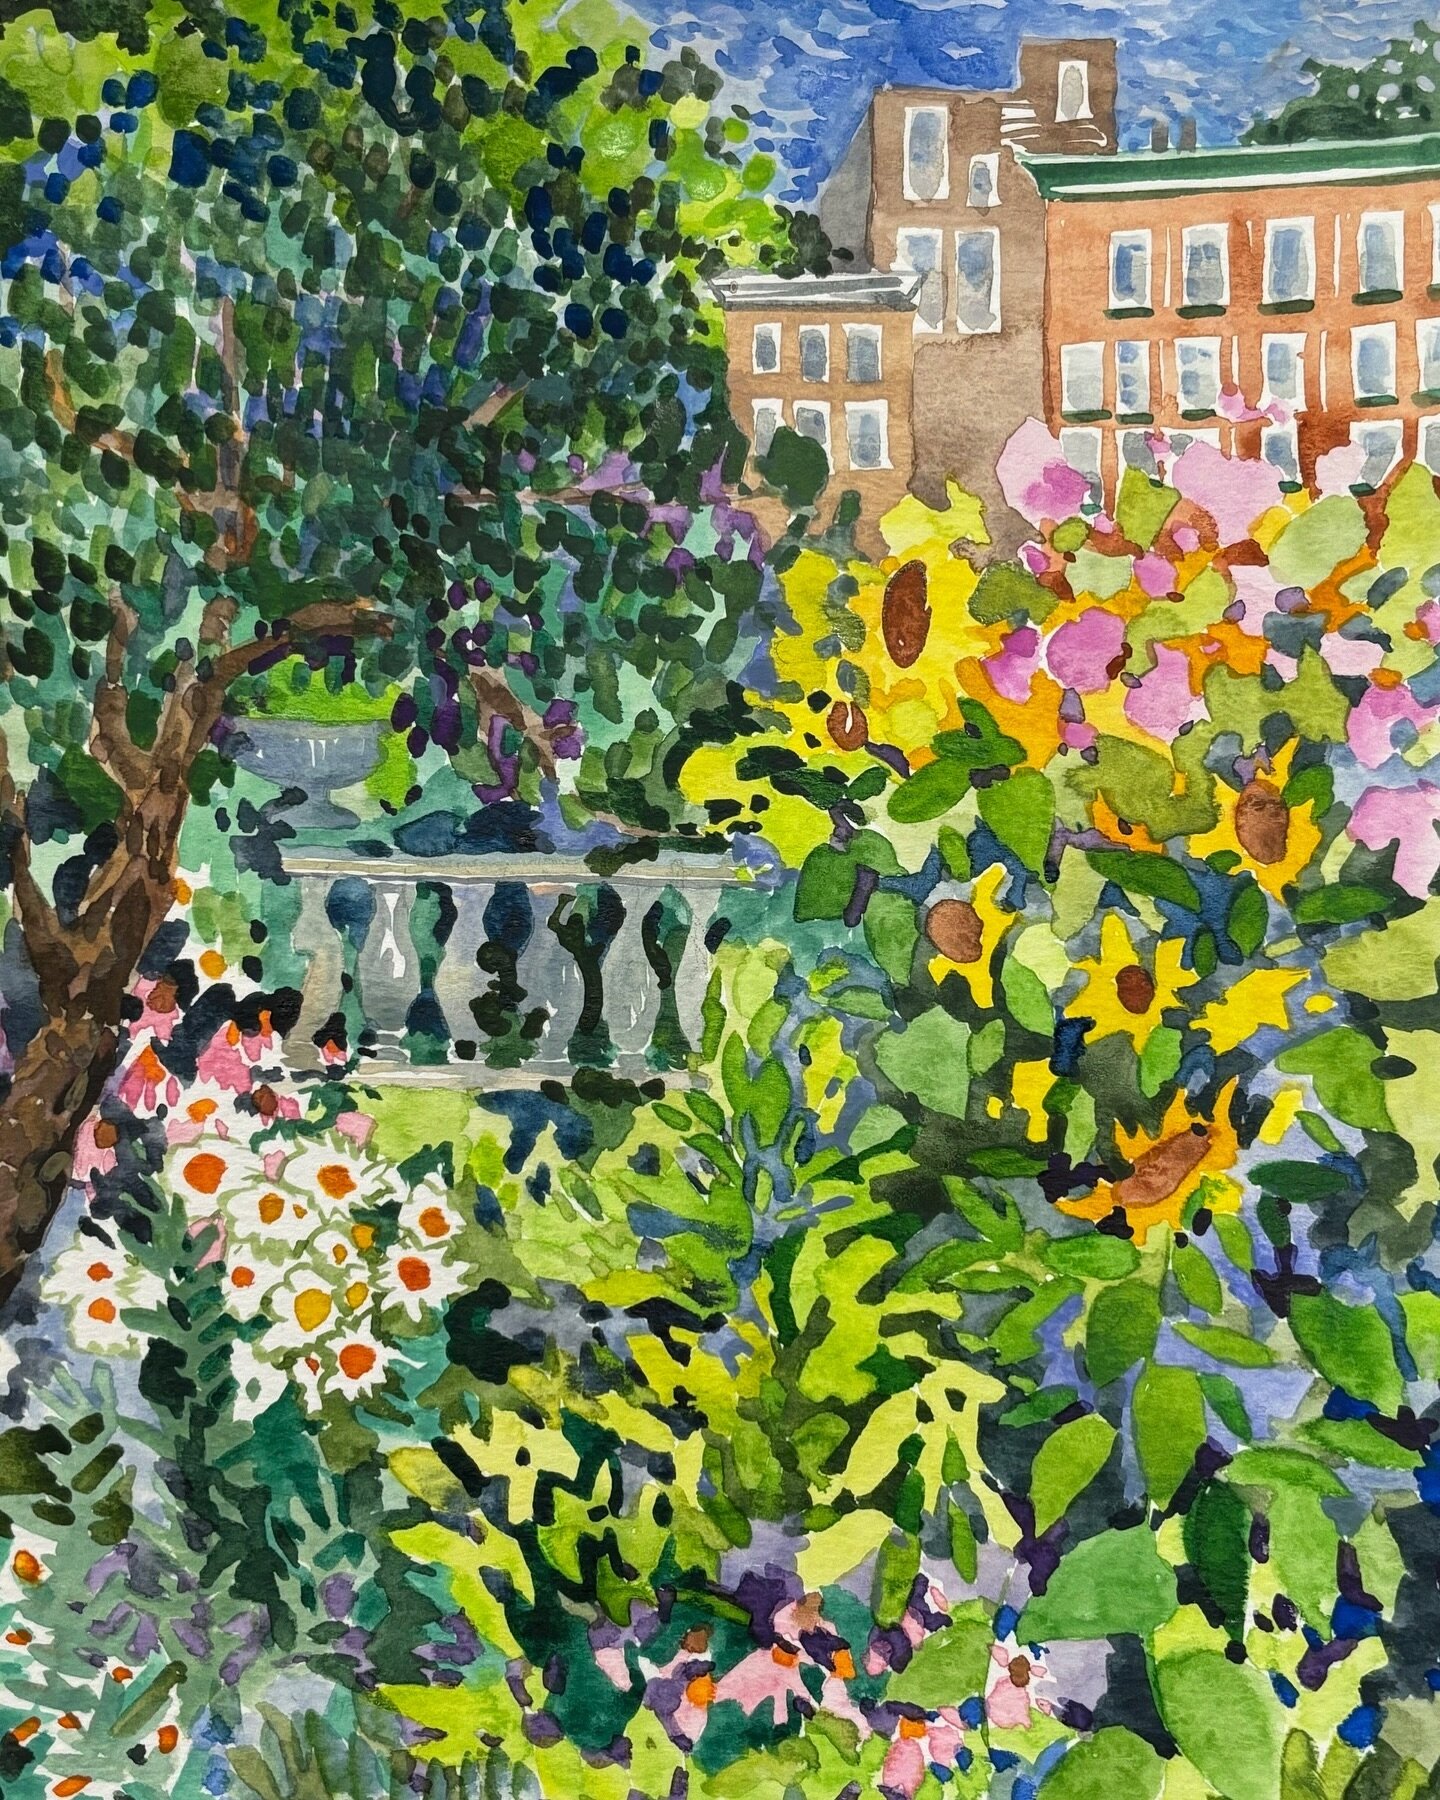 This week&rsquo;s featured work from our Call to Artists is a painting of the garden in summer by hazeljarvisstudio 

Submit your ESG-inspired work of any medium to art@elizabethstreetgarden.com and use #iArtESG 

#ElizabethStreetGarden #SaveESG